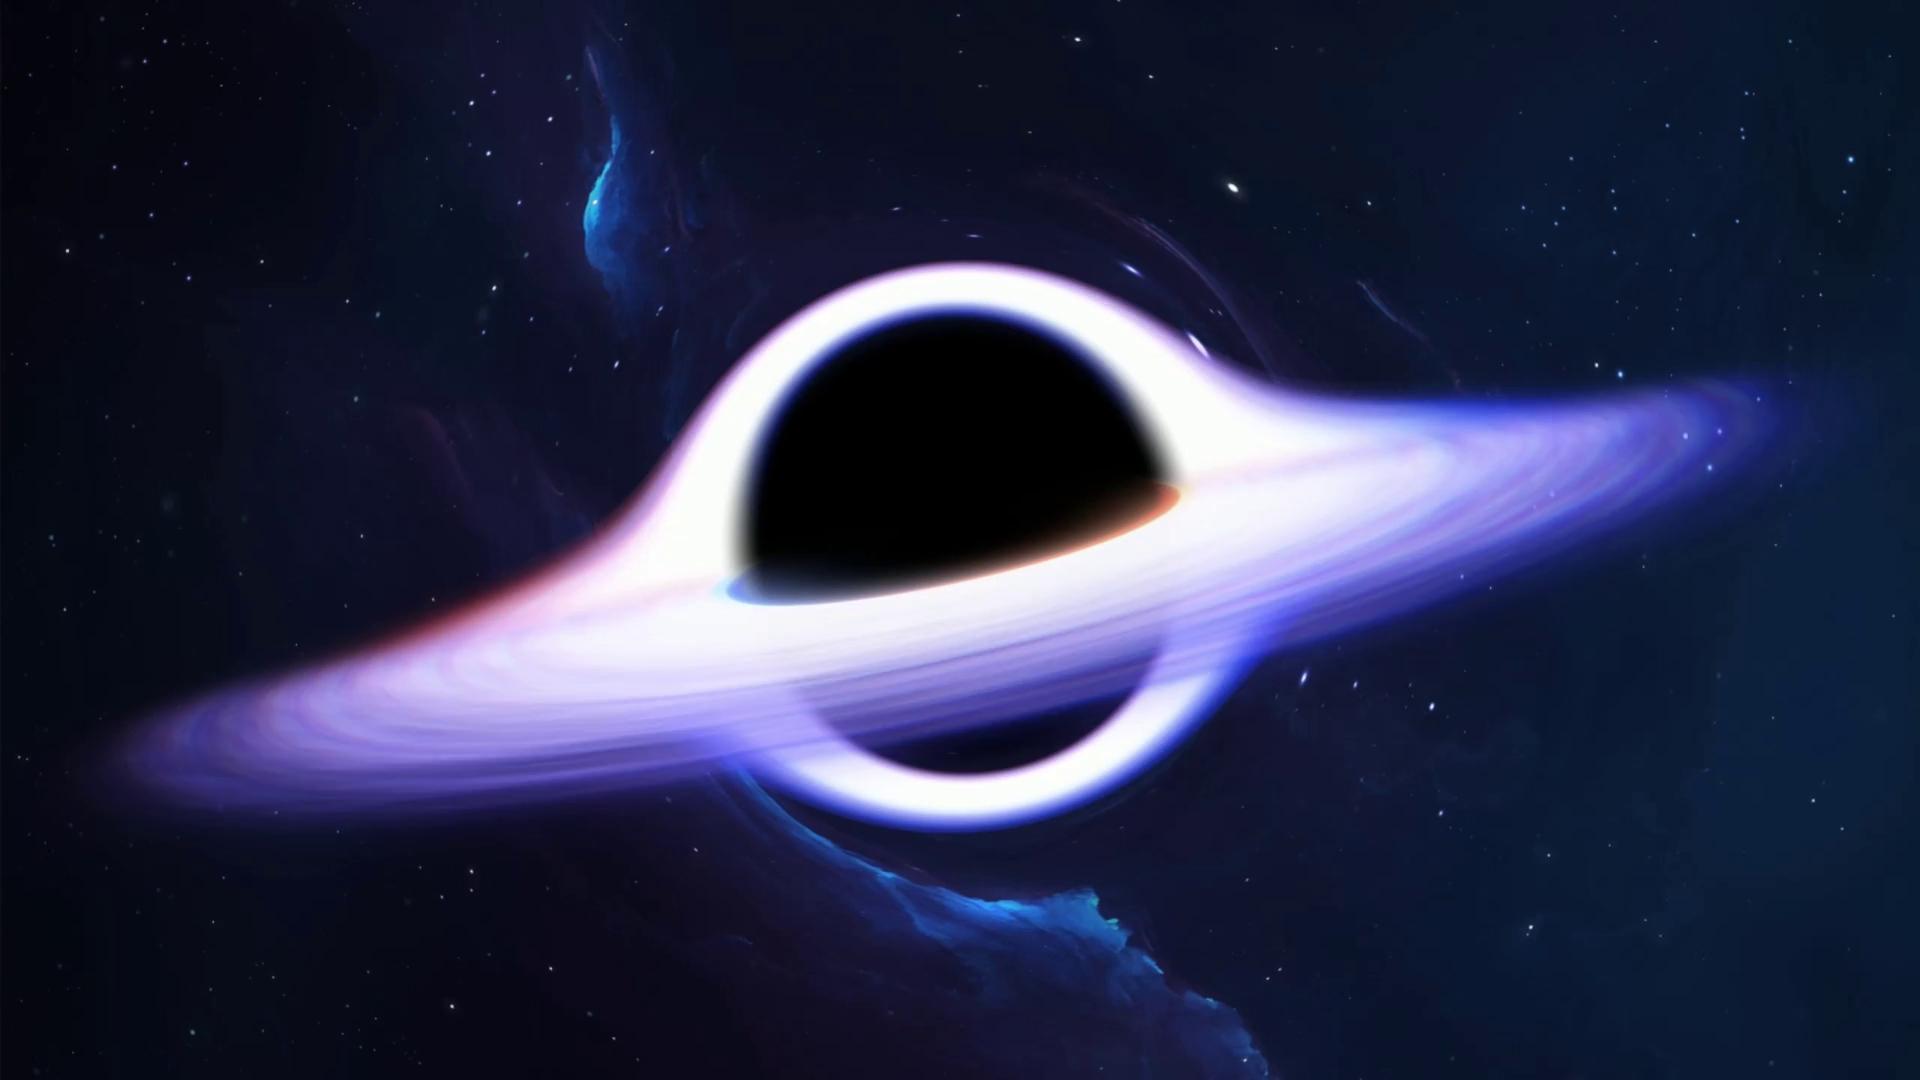 Black Hole Wallpapers 33 images inside